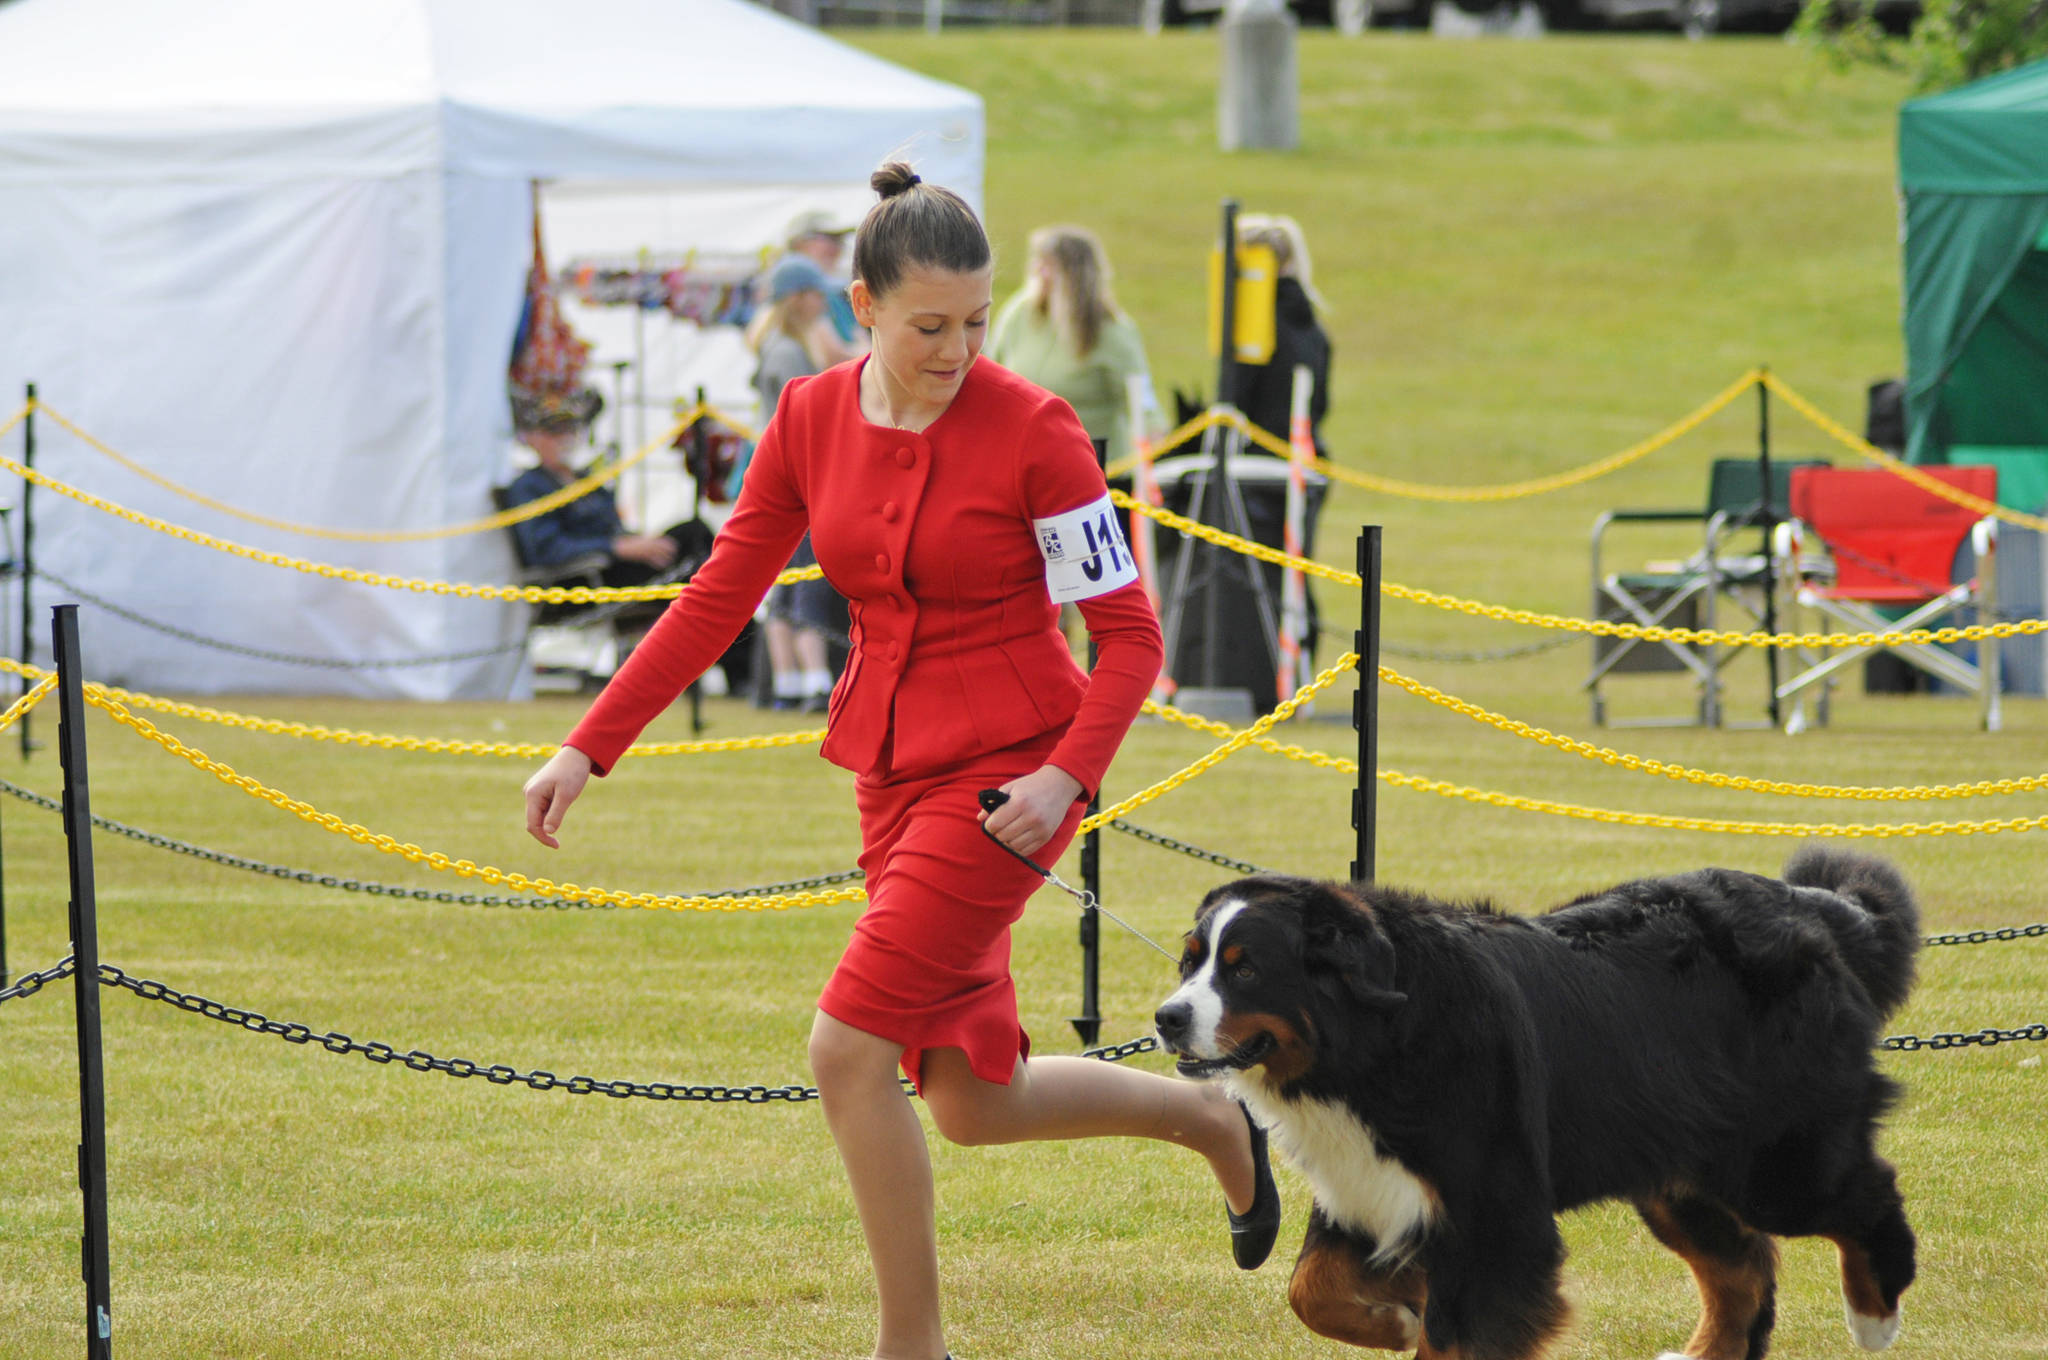 A trainer runs her Bernese Mountain Dog in the Kenai Kennel Club’s annual dog show, obedience and agility trials on Saturday, July 14, 2018 in Soldotna, Alaska. Dog owners come from all over the state to take part in the events each year. (Photo by Elizabeth Earl/Peninsula Clarion)